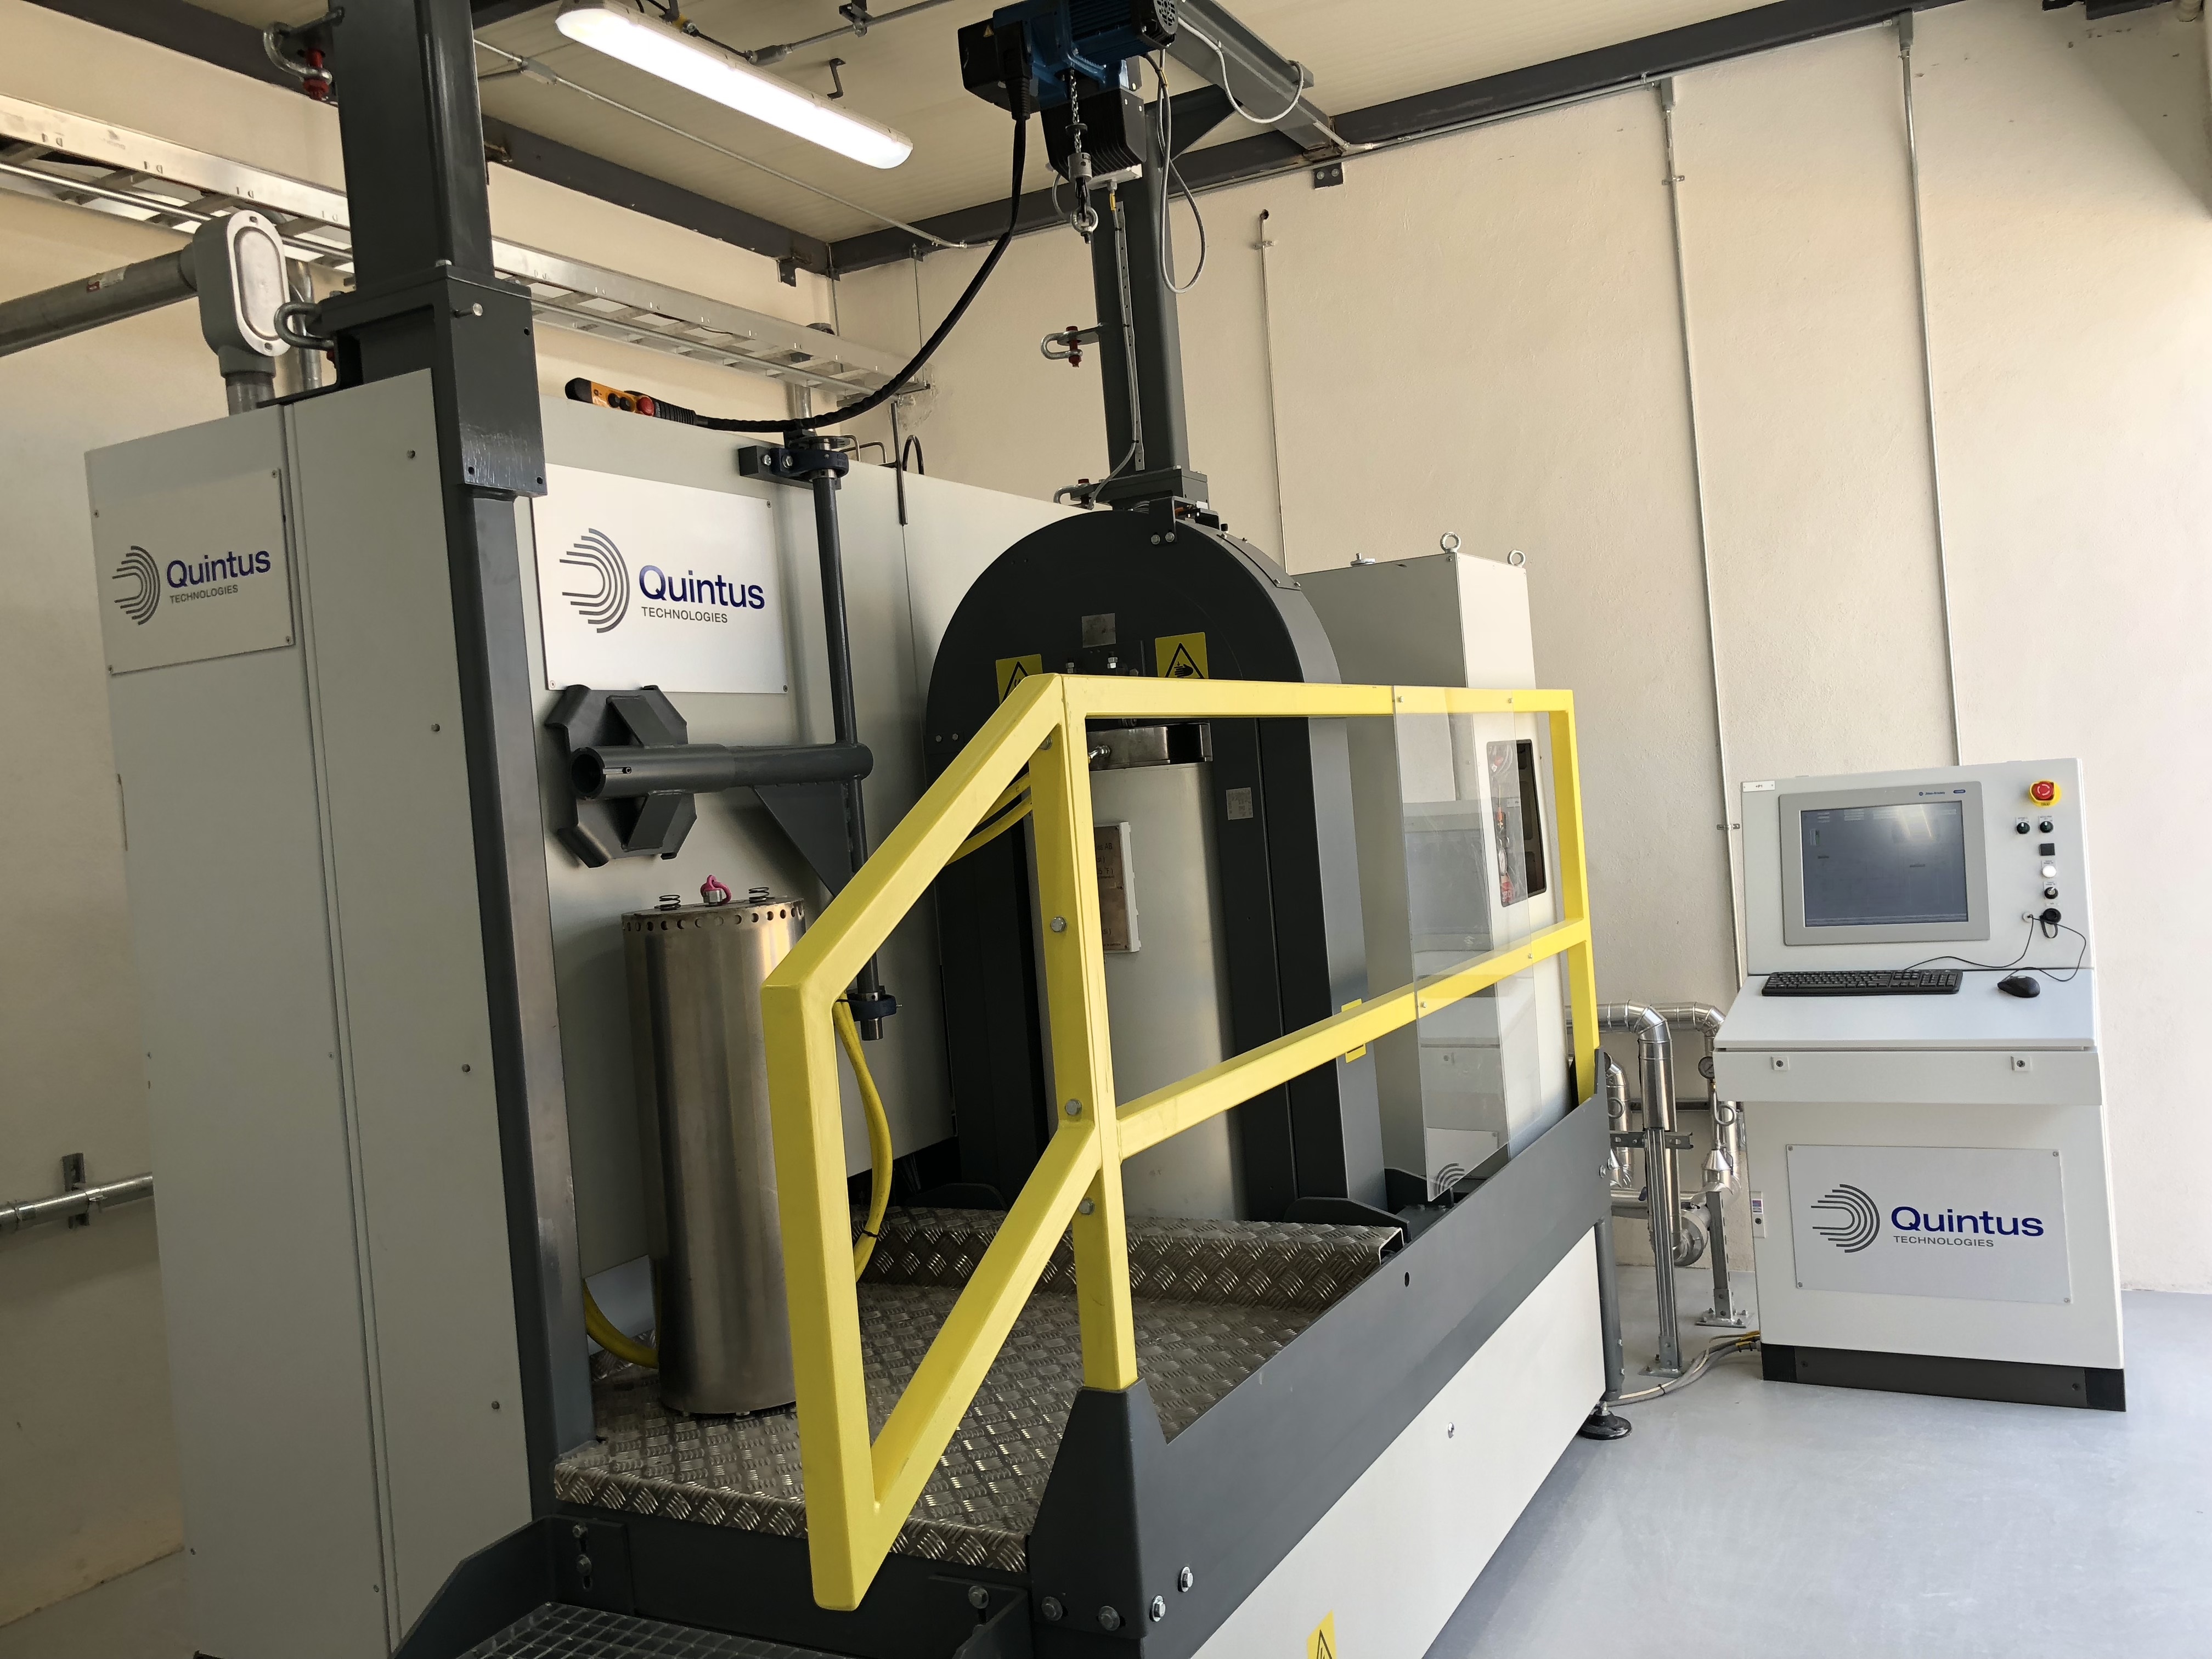 The Quintus QIH-15L HIP system will support advanced process development and production at CIDESI, one of Mexico’s top research and innovation organizations. (Photo courtesy Quintus Technologies.)